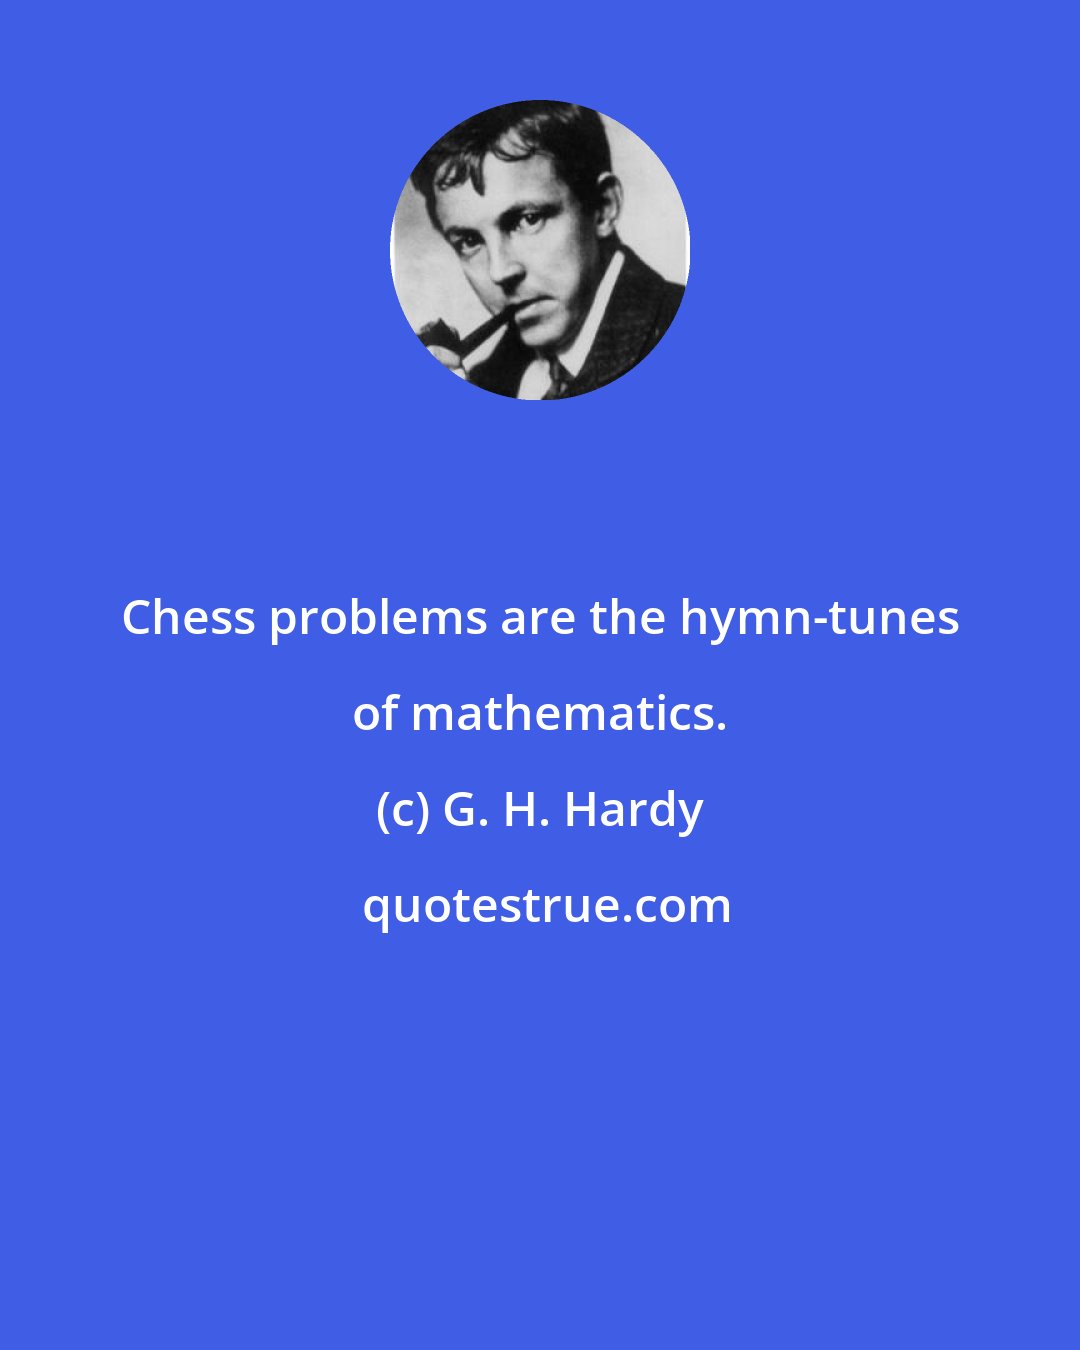 G. H. Hardy: Chess problems are the hymn-tunes of mathematics.